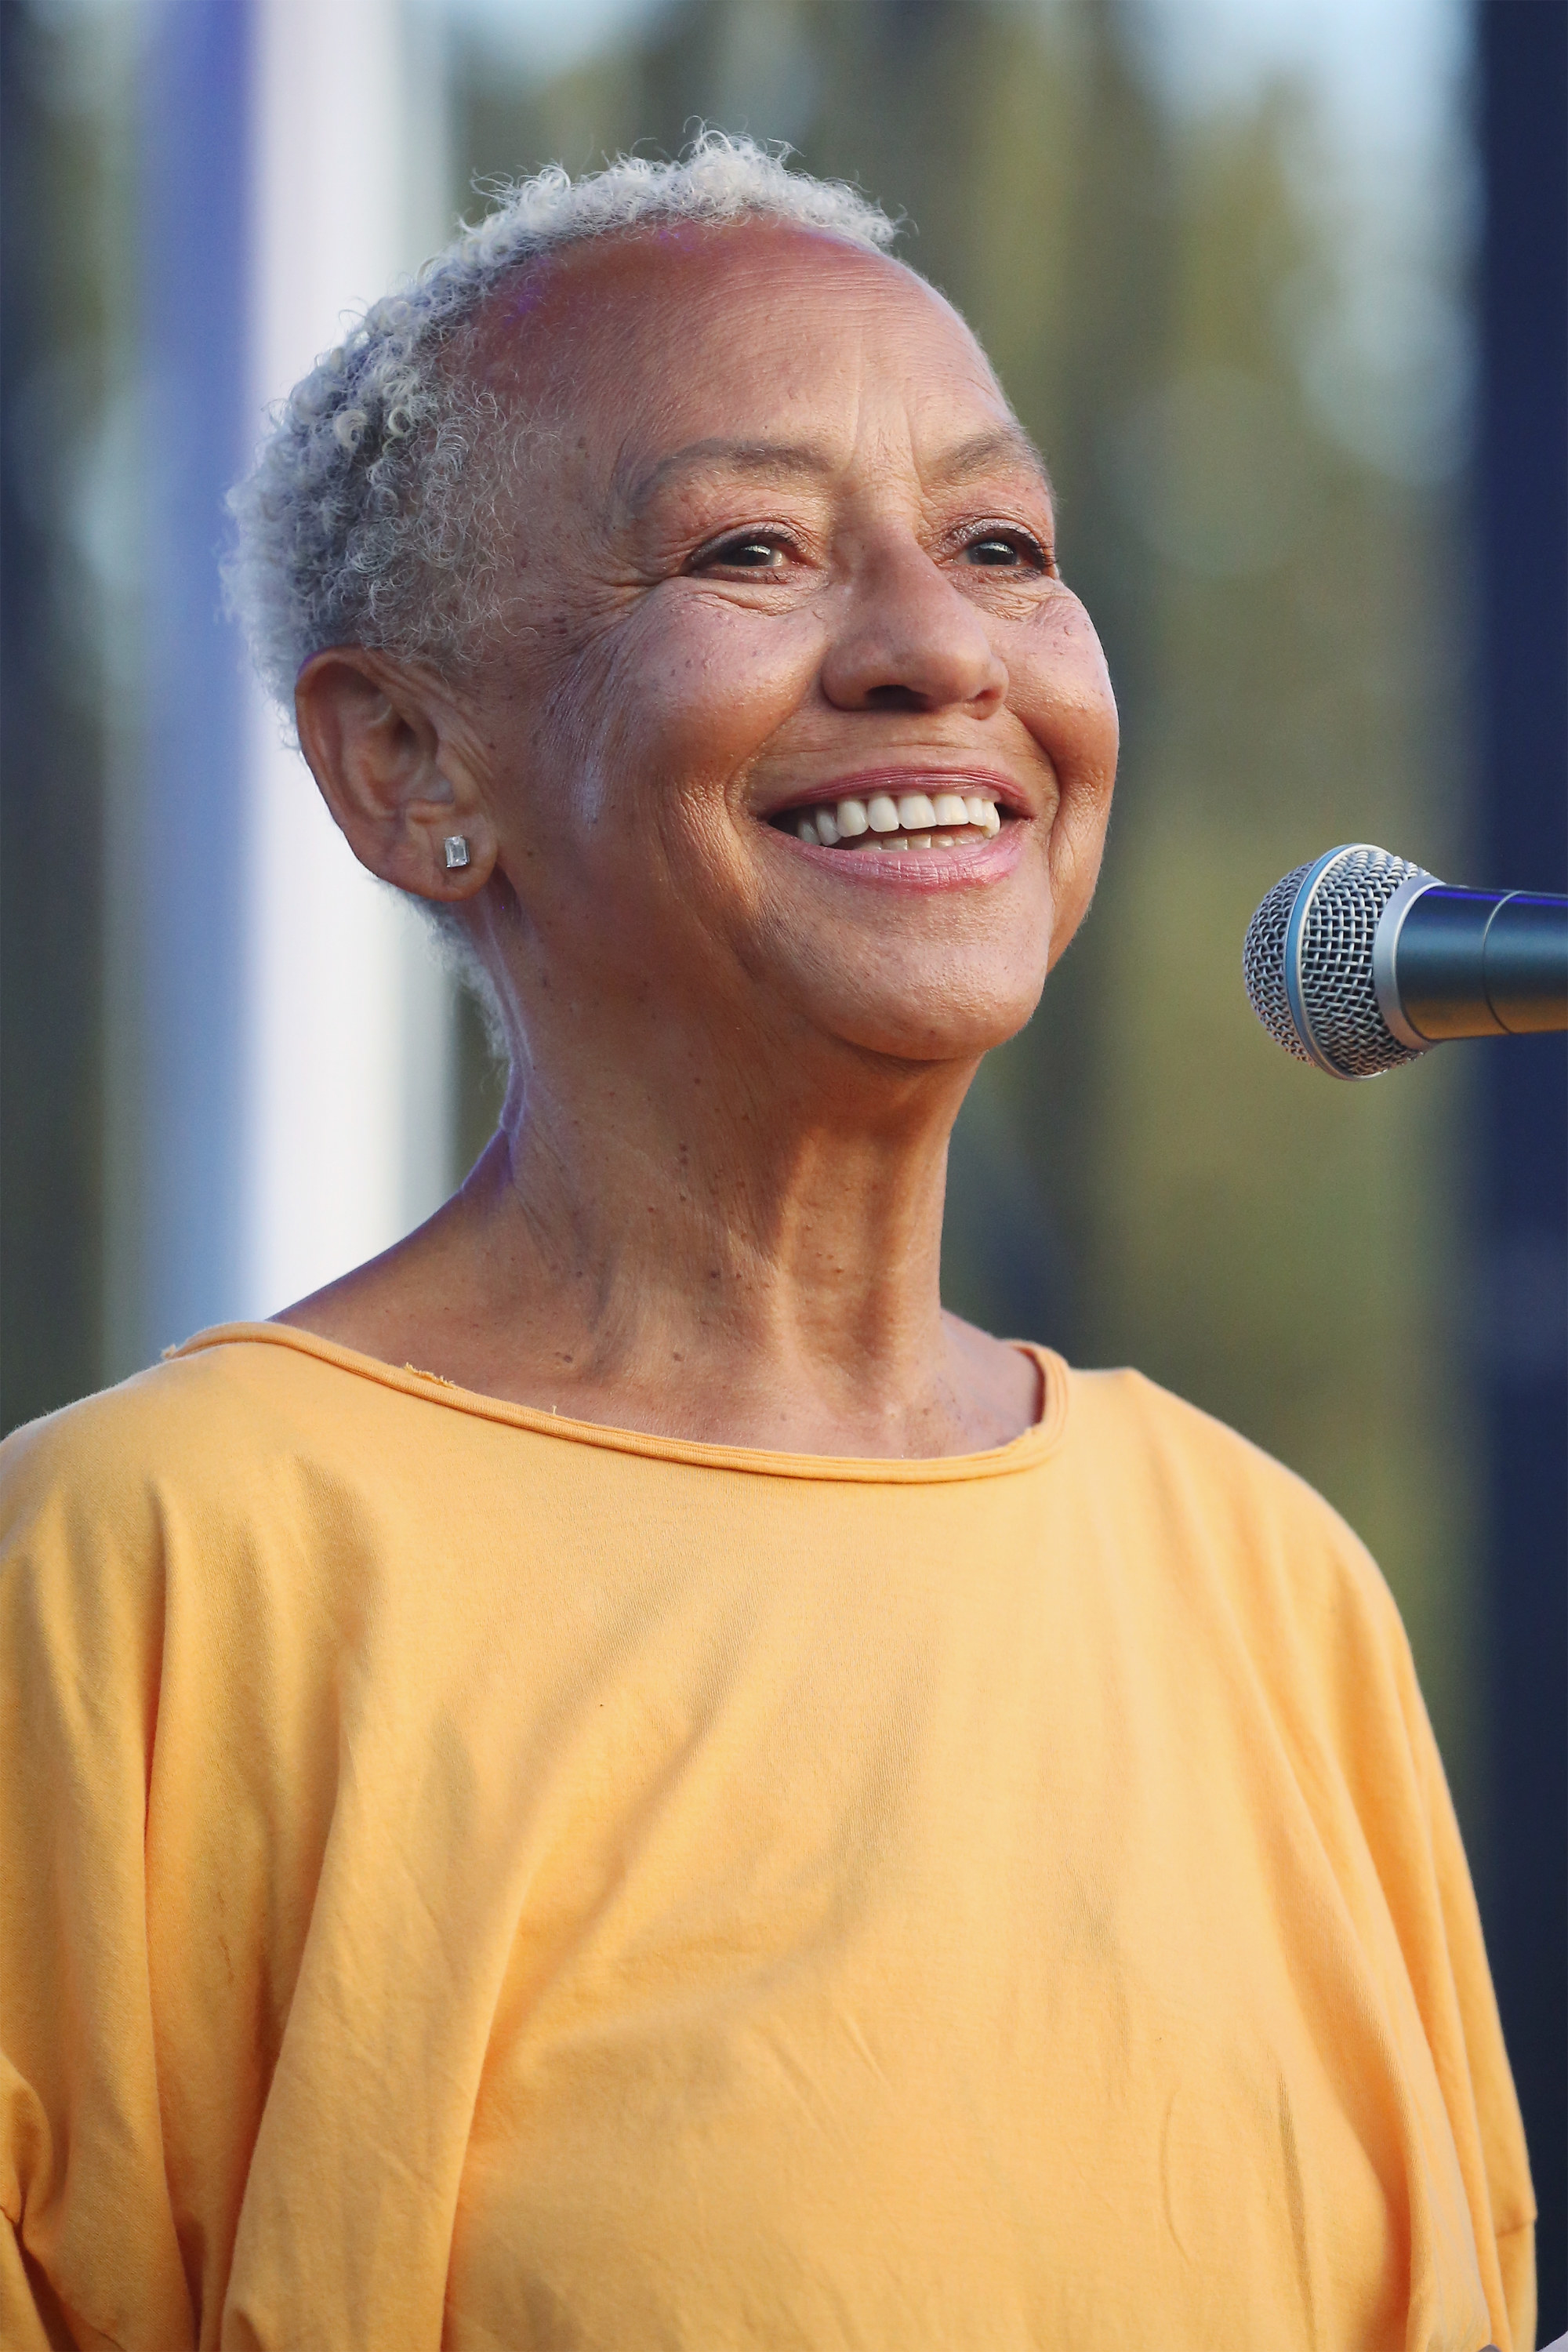 Poet Nikki Giovanni talks on stage at the 12th Annual Afropunk Brooklyn Festival at Commodore Barry Park in 2016